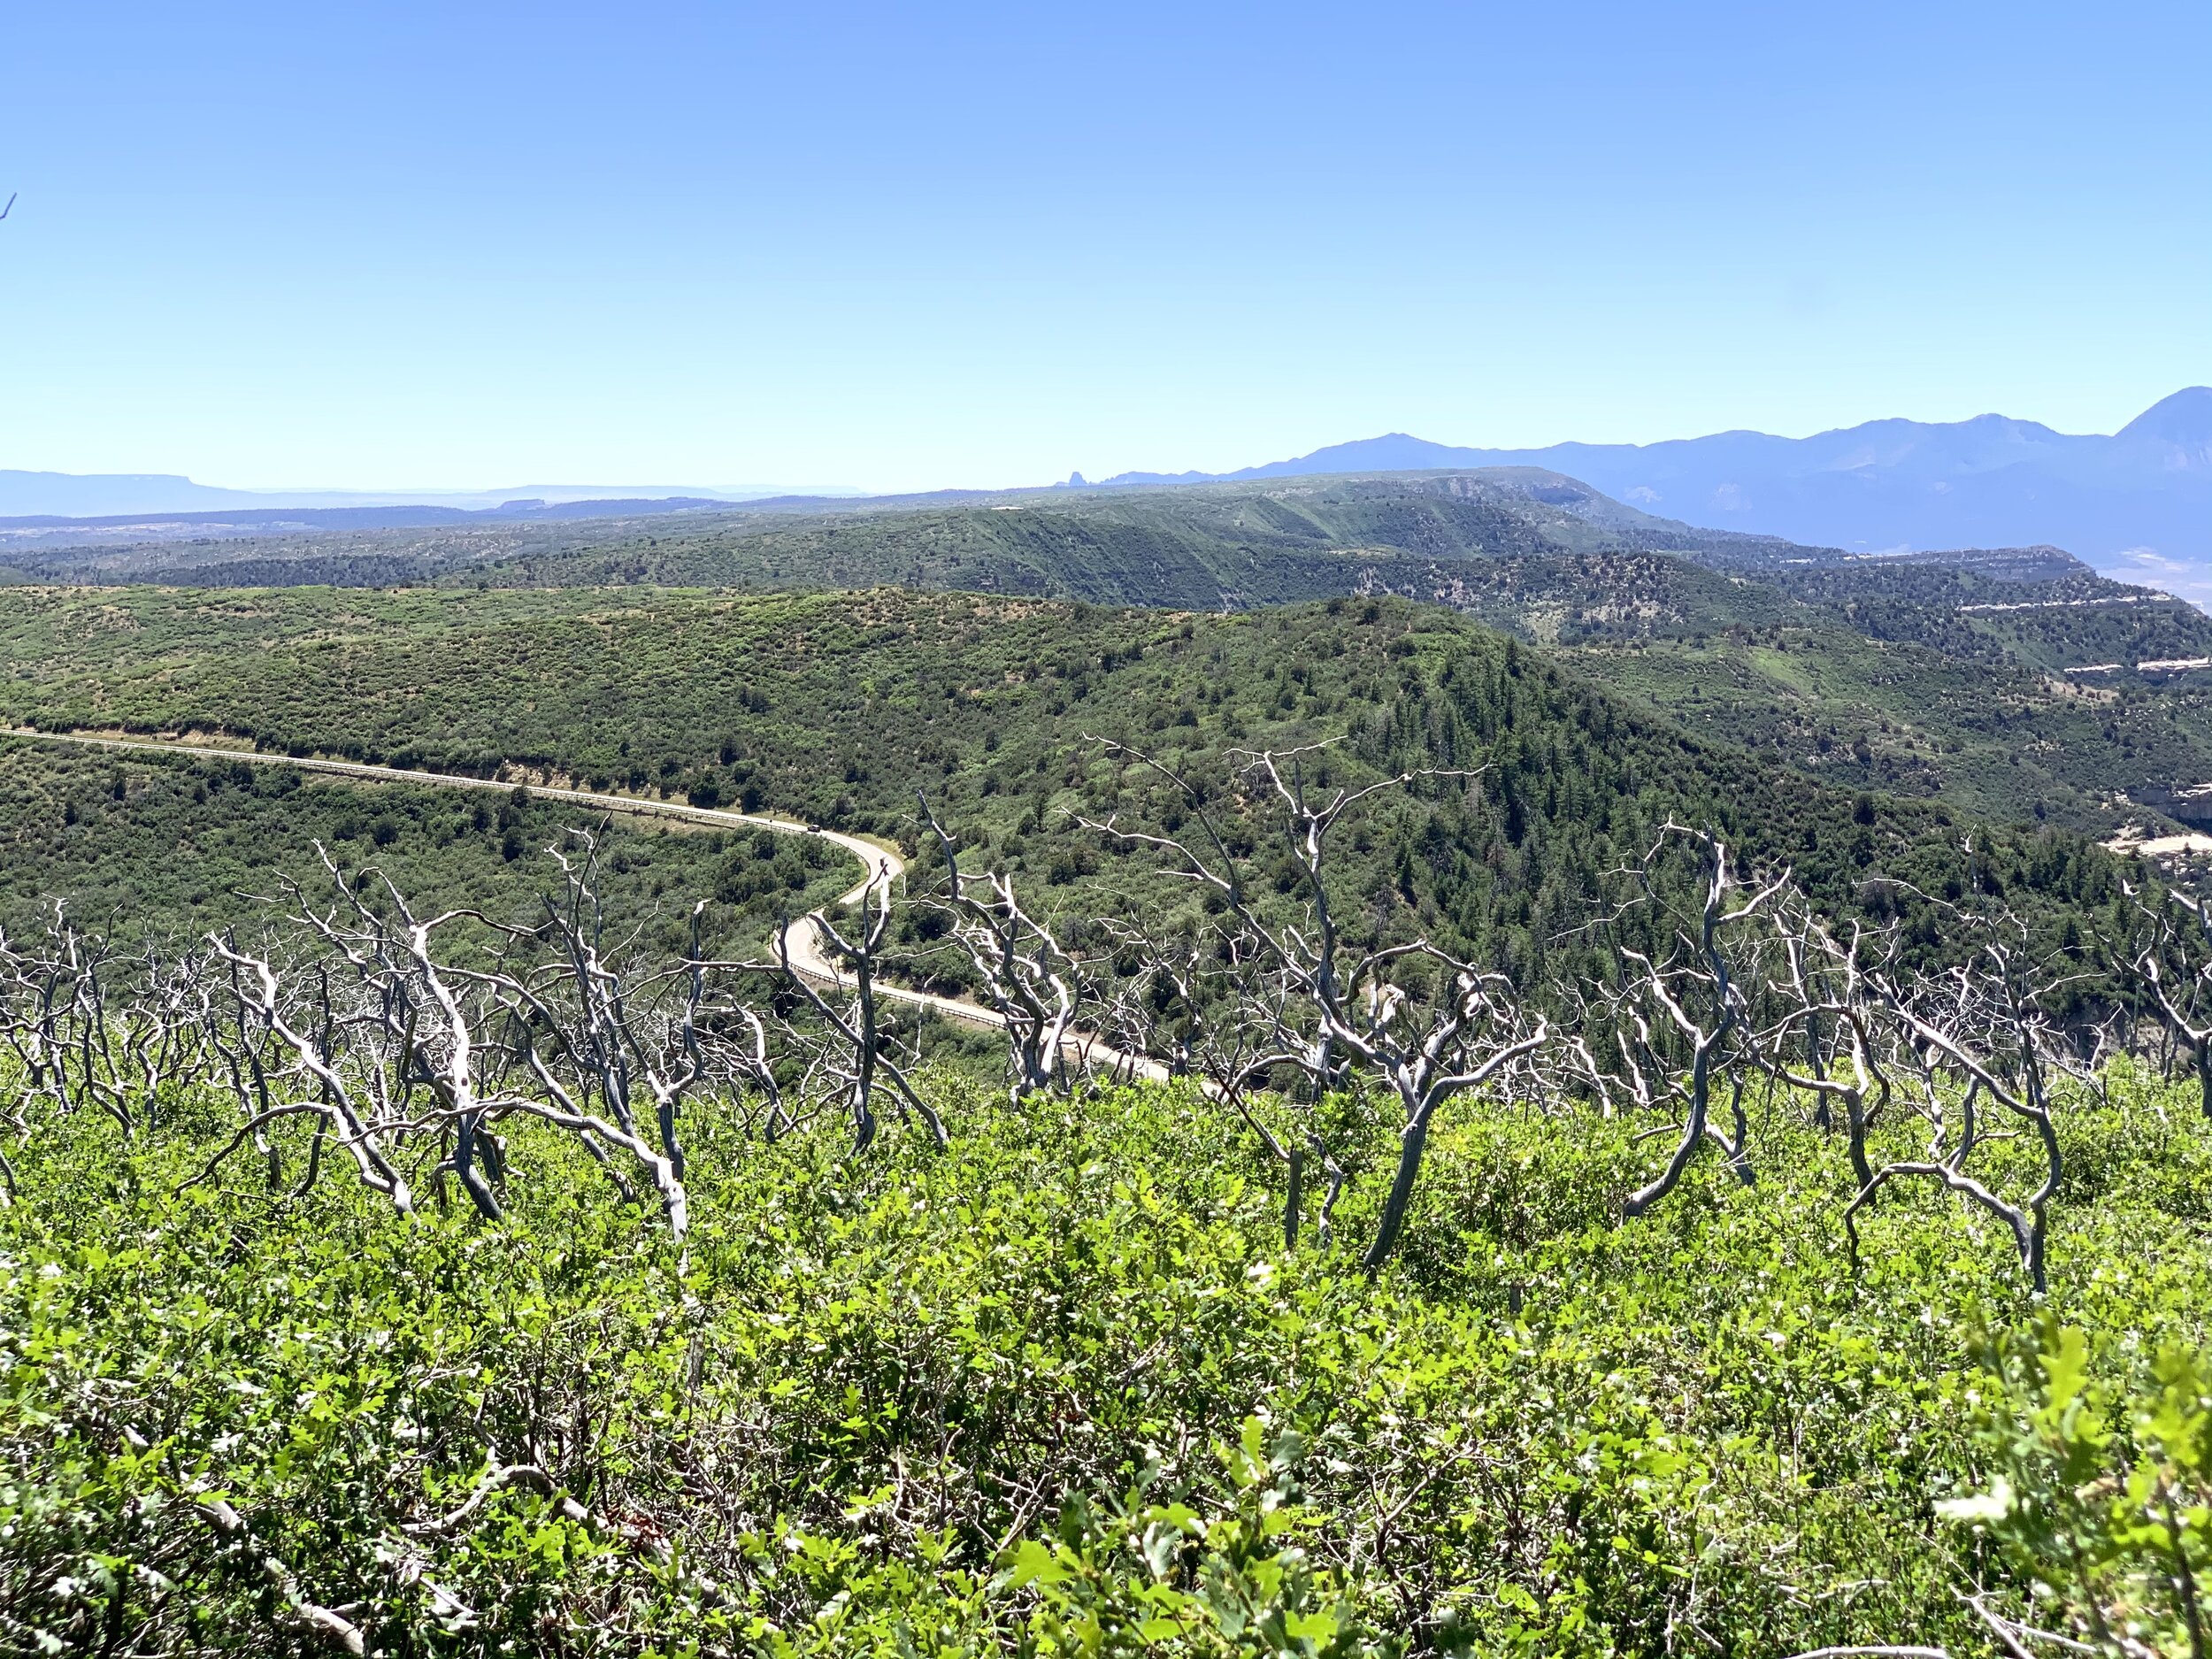  Lots of   Green Tables   here.  😀 Multiple lightning-strike fires destroyed 450 acres of greenery here in July of 2003. This picture shows many of the trees that still stand, though burned by fire, and all the underbrush greenery that grows back mu